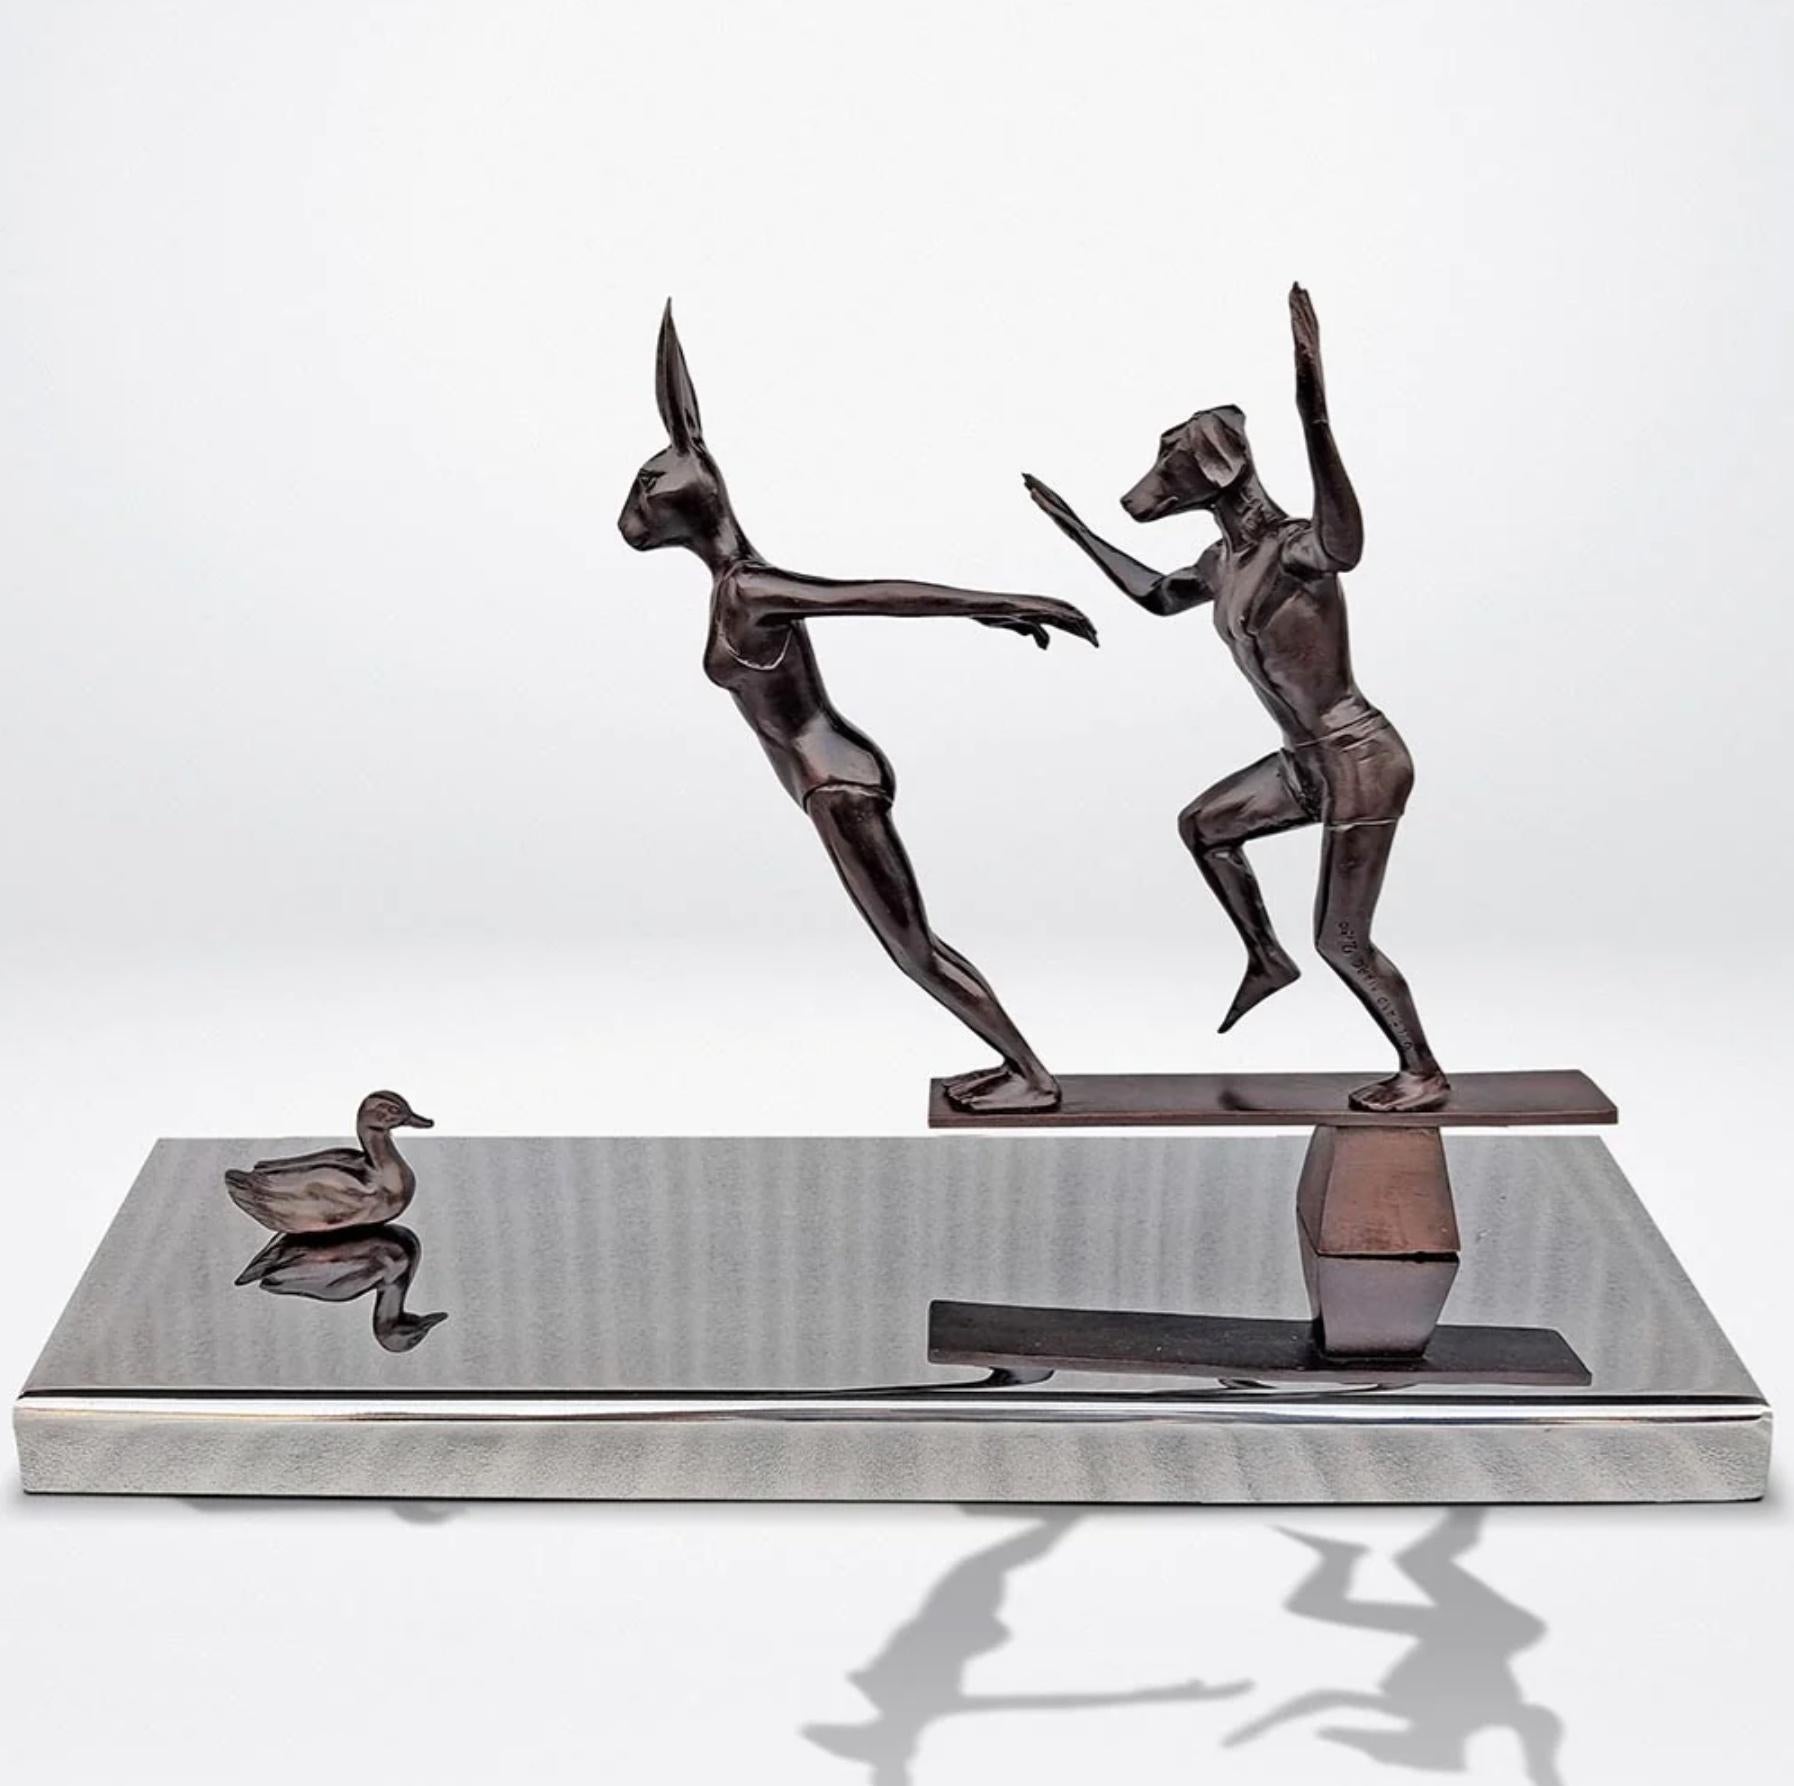 Authentic Bronze They dived into life sculpture by Gillie and Marc  - Contemporary Art by Gillie and Marc Schattner